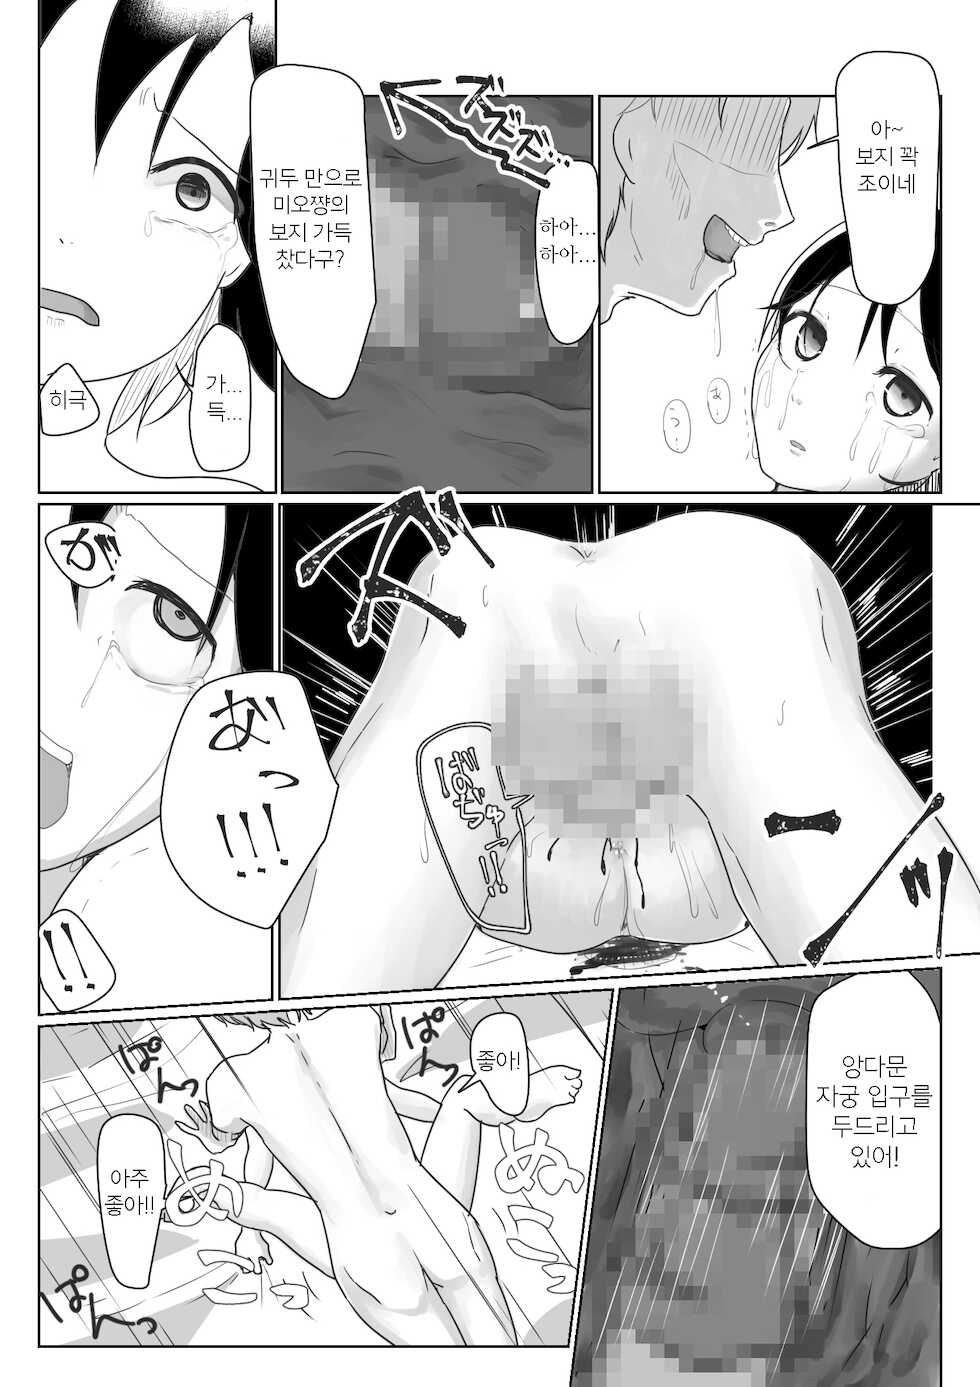 [Dejimeshi] "Someone help me" ~ Lori abducted genitals and mental destruction ~ - Page 10